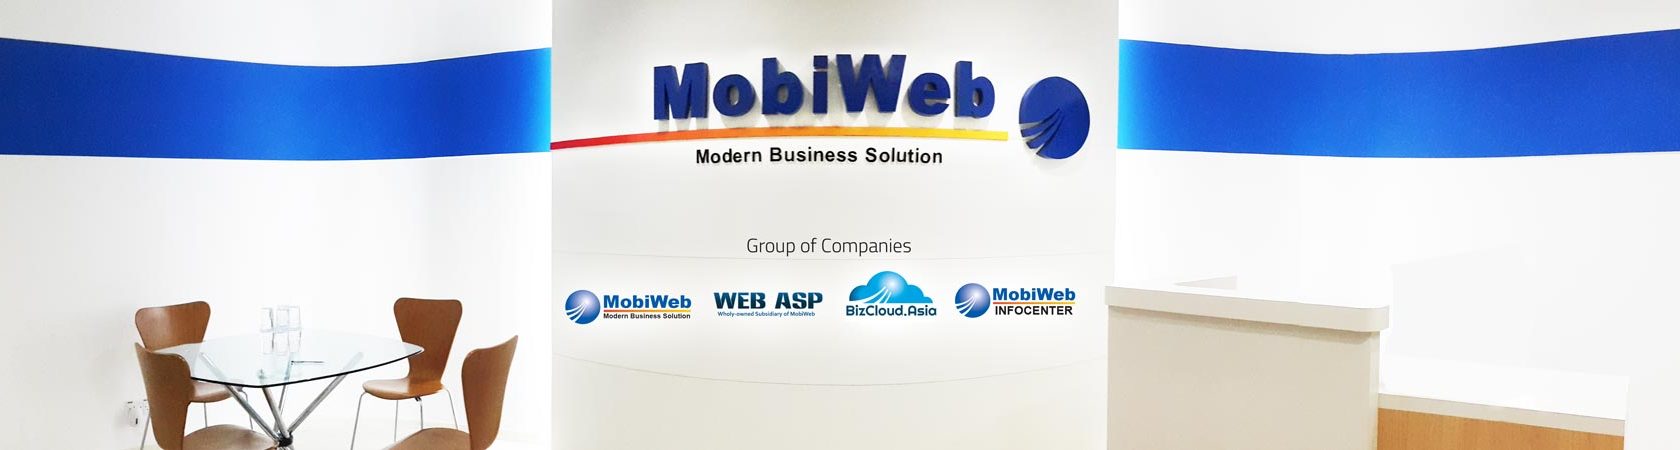 Mobiweb Group of Companies